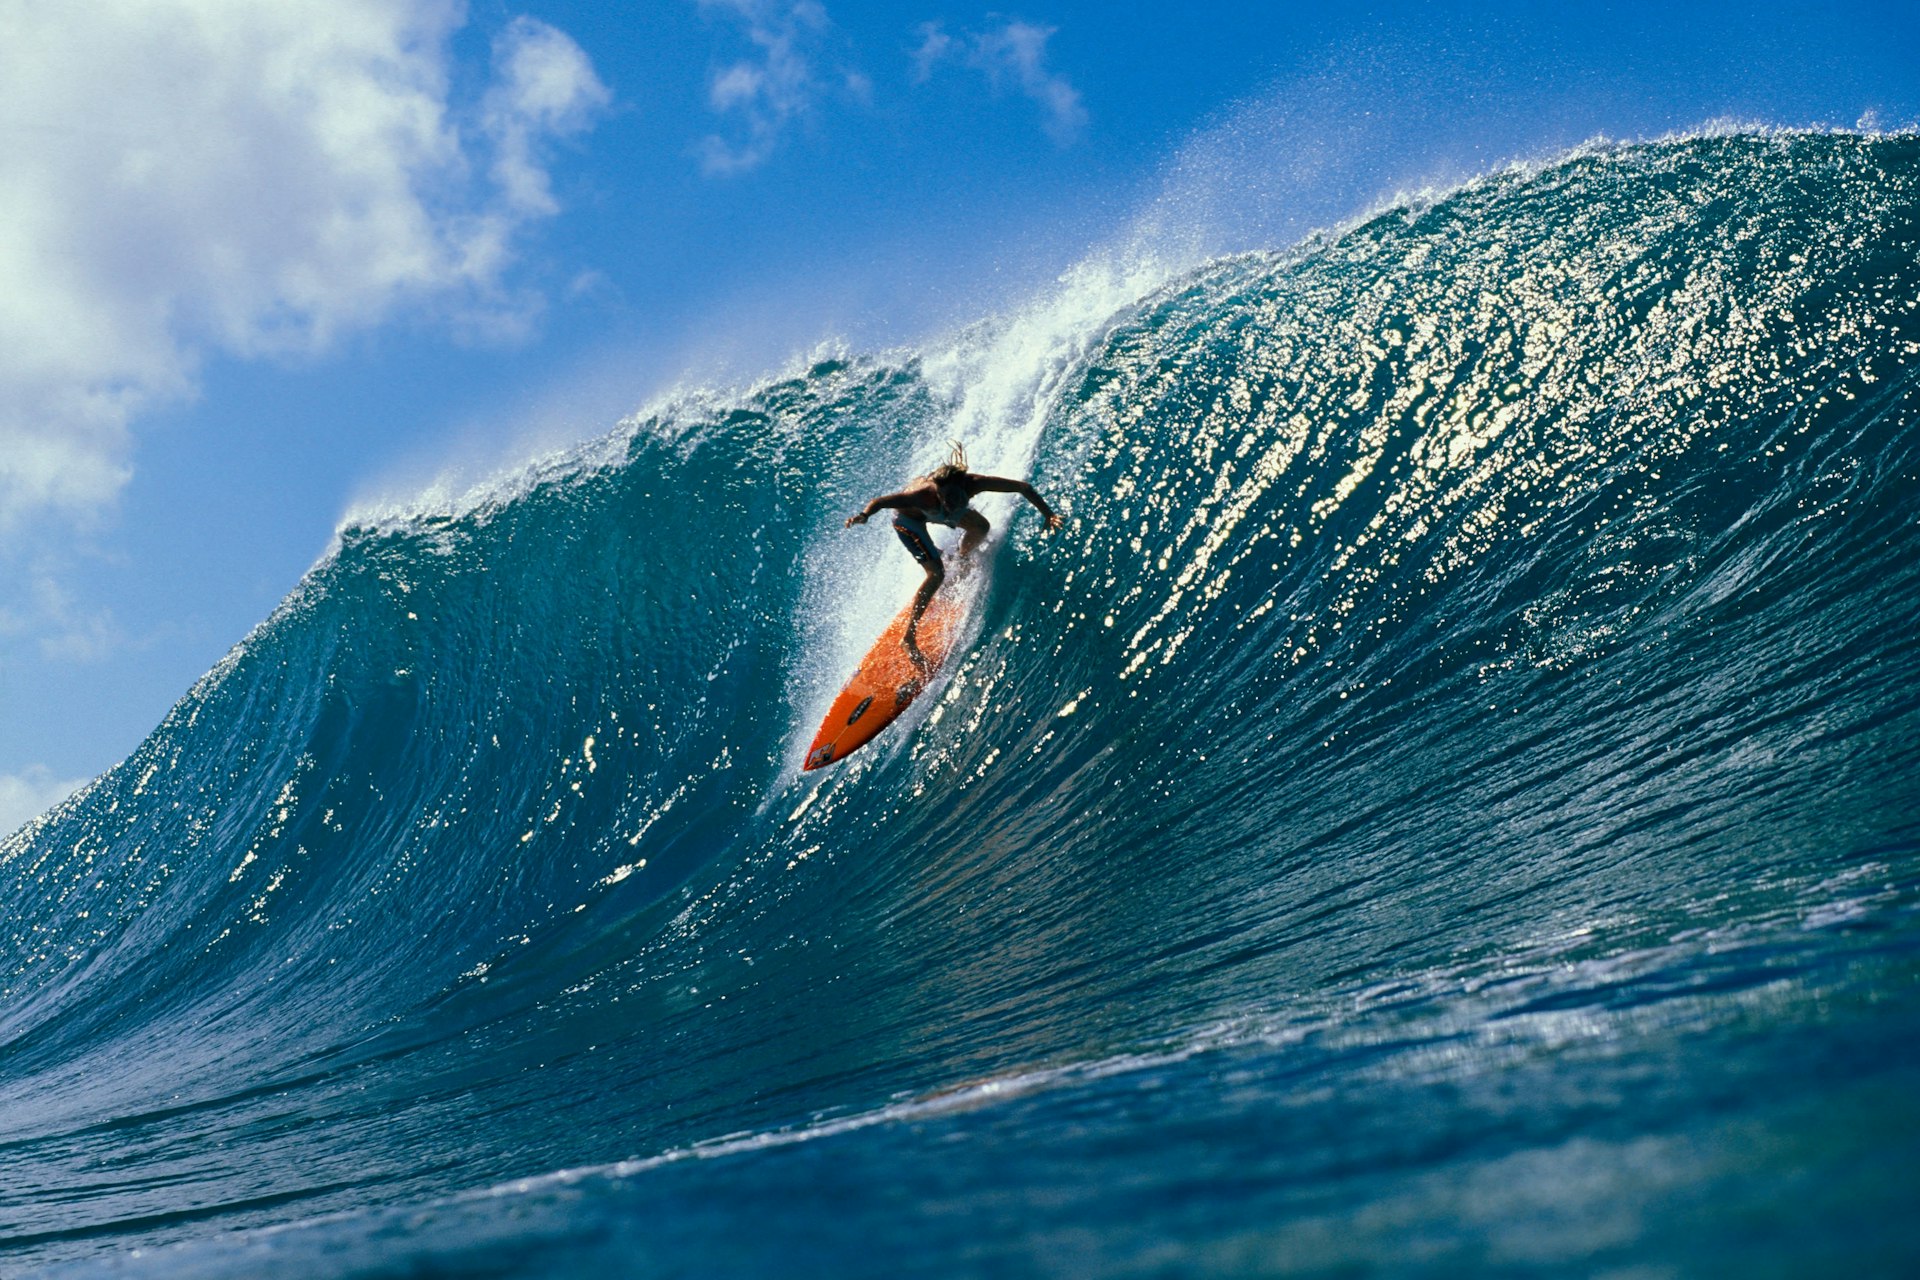 A surfer rides down a very large wave on the North Shore, one of O‘ahu’s highlights.